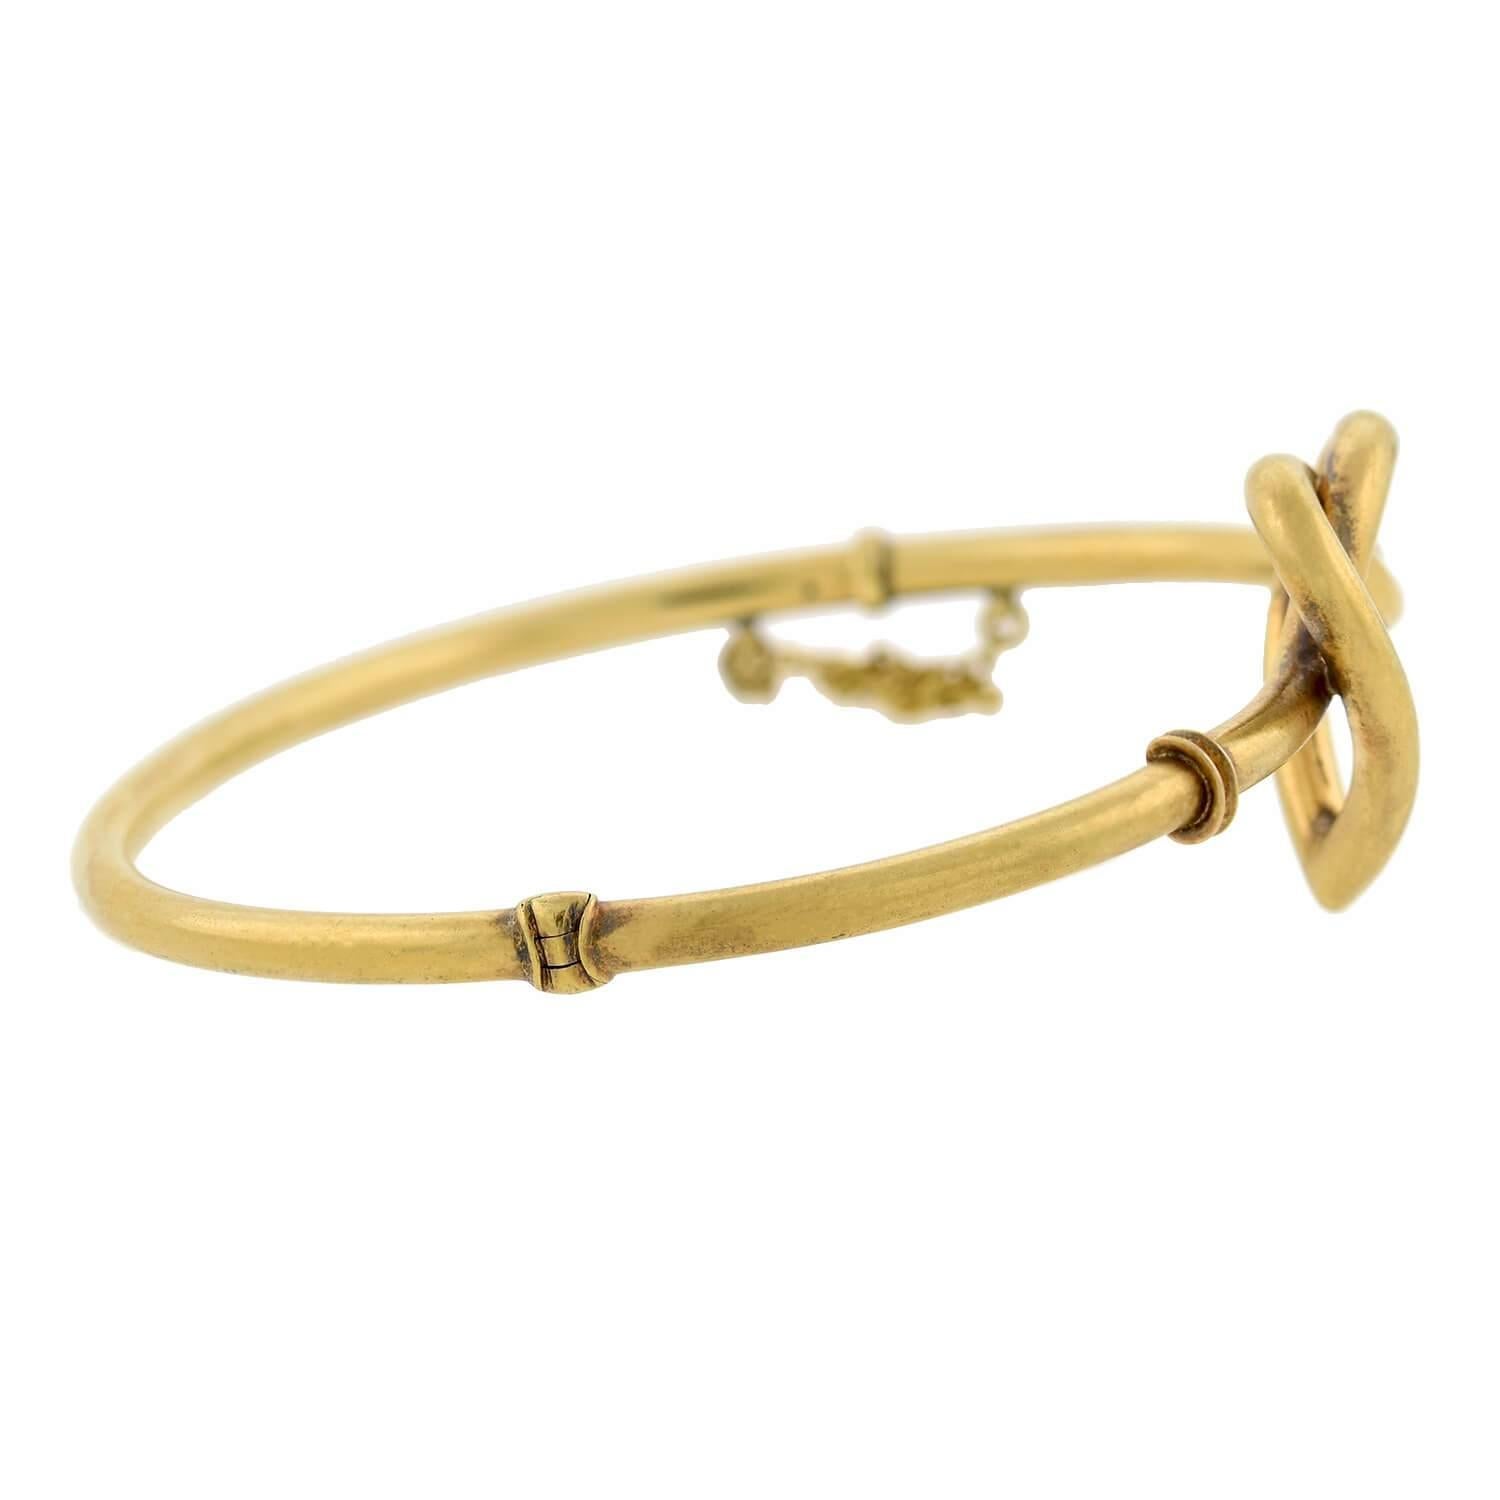 A stunning love knot bracelet from the Victorian (ca1880) era! This gorgeous piece is crafted in 15kt yellow gold and features a heart-shaped love knot design at its center. The knot is formed by a single gold tube which creates the band of the